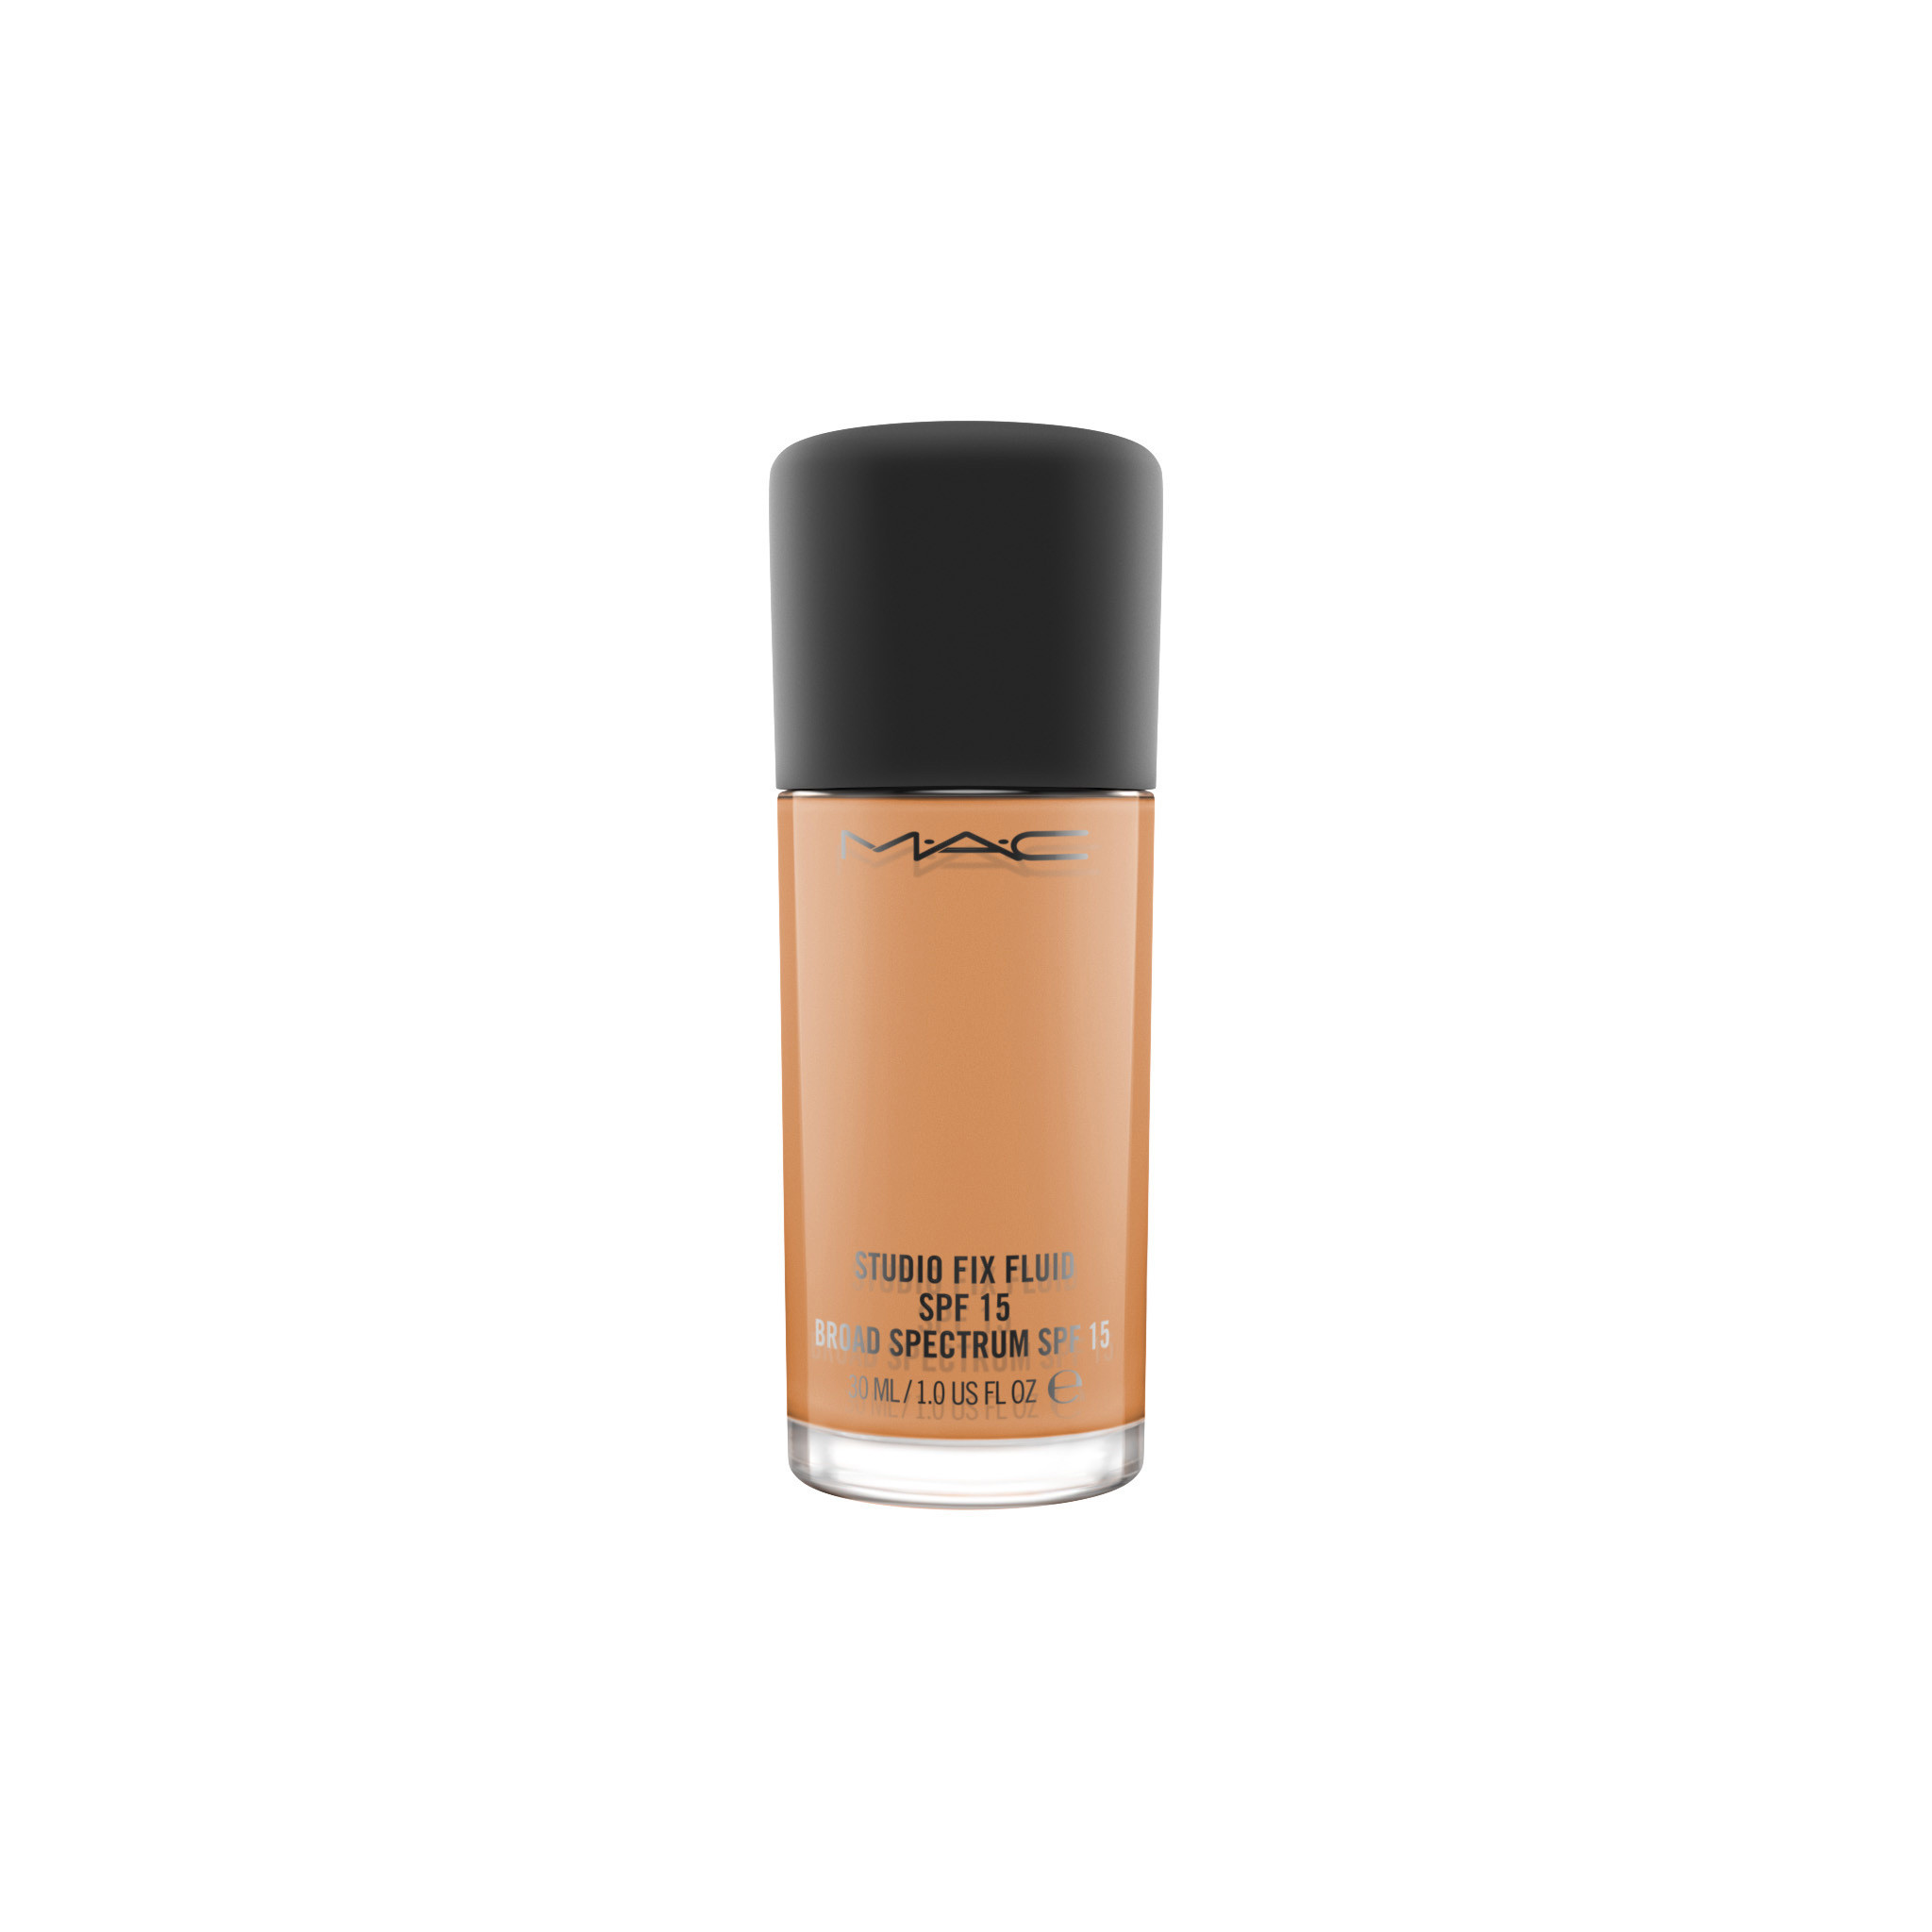 Studio Fix Fluid Foundation Spf15 - NW43, NW43, large image number 0